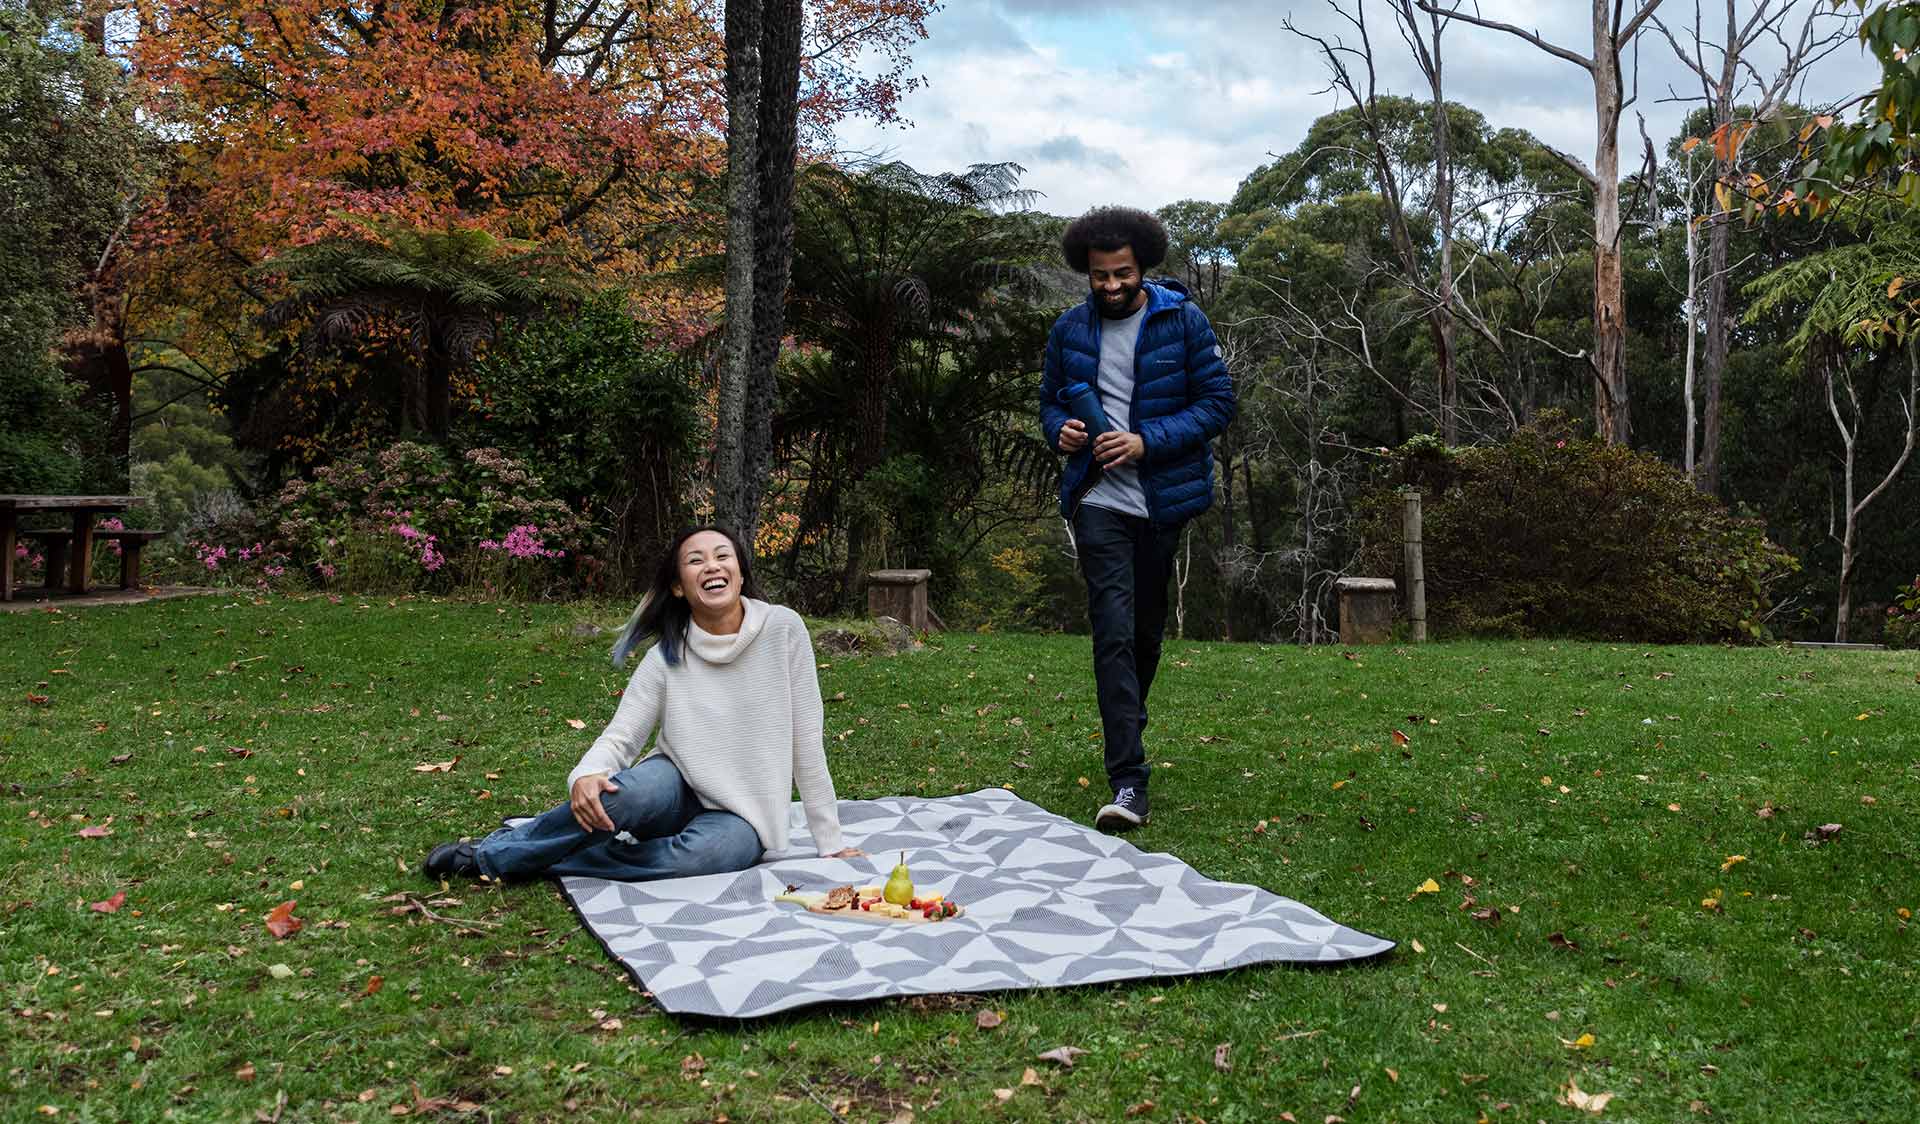 A man in a blue puffer jack walks towards a women with black hair wearing a cream jumper to join a picnic.